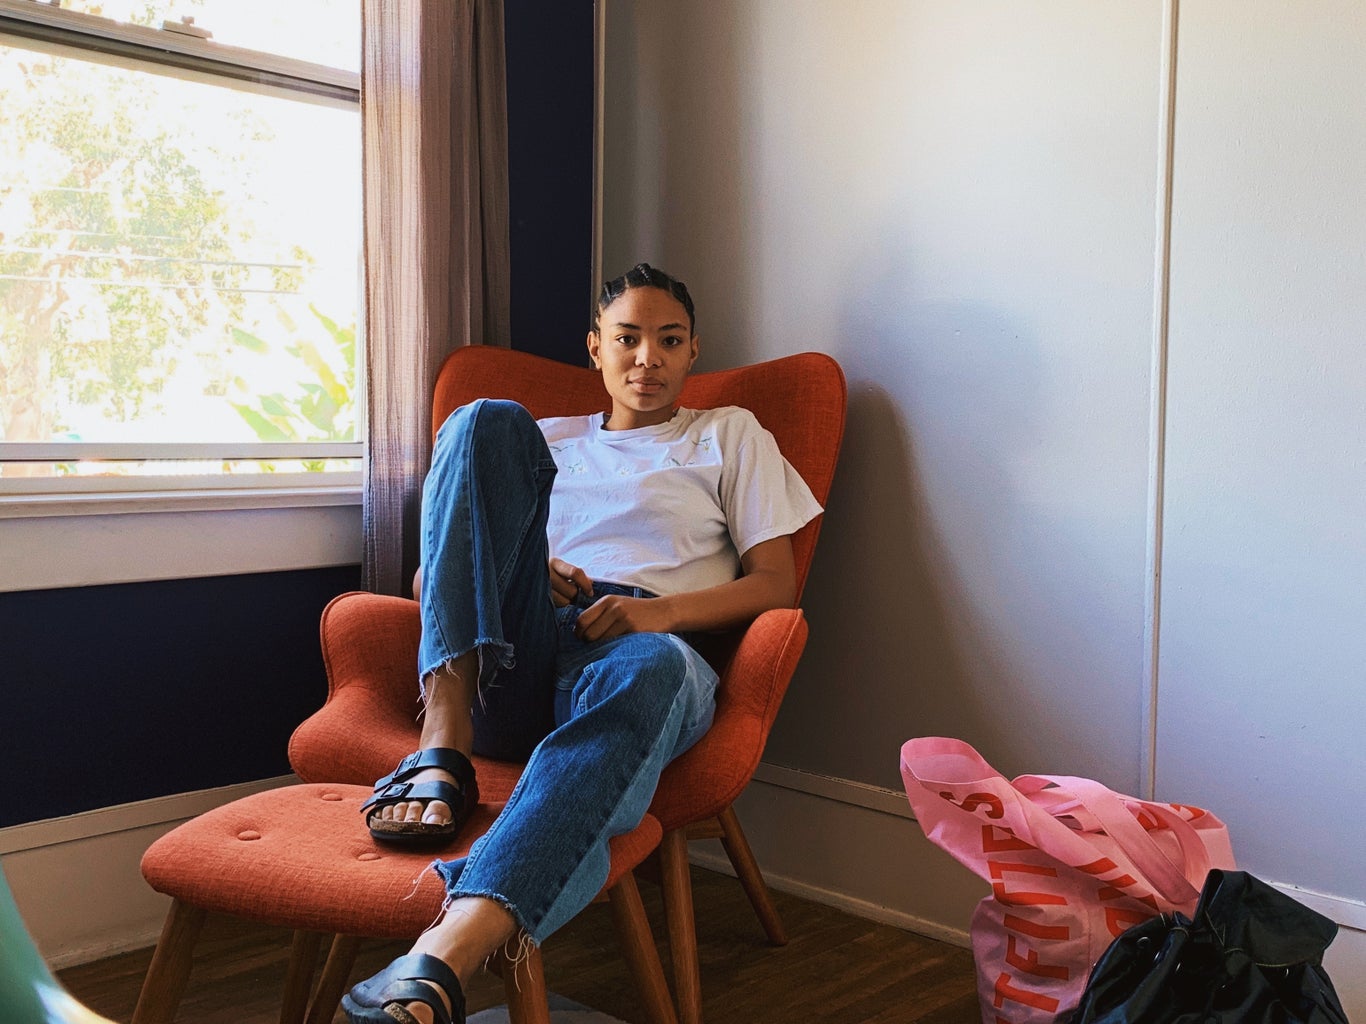 young woman sitting in dorm room